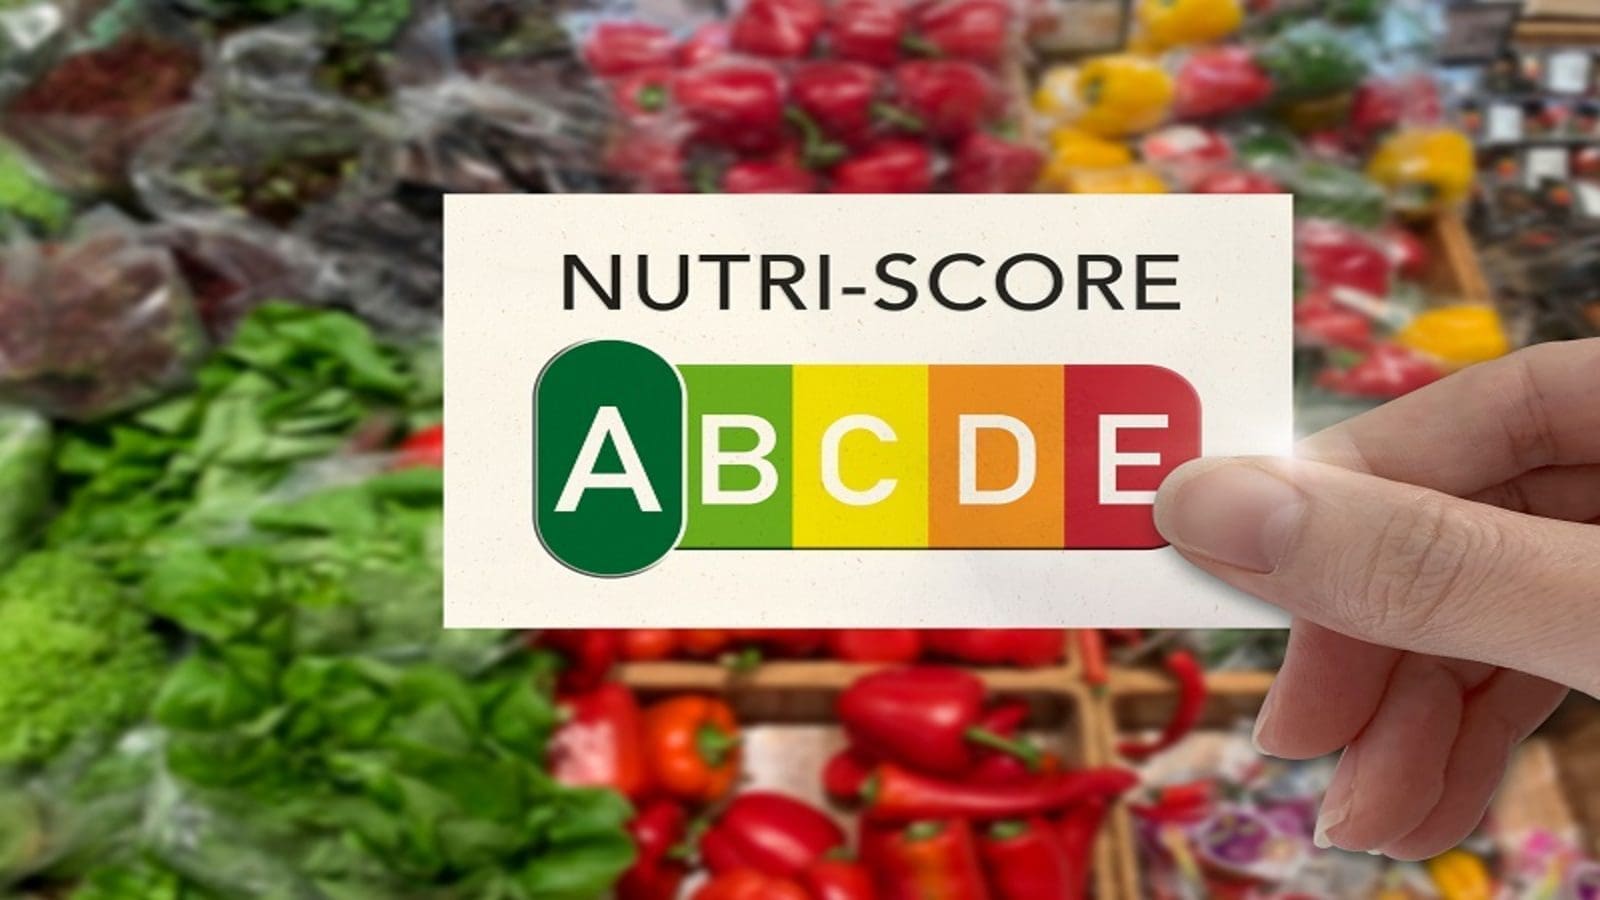 Italy bans Nutri-Score, claims labelling system could be construed as misleading